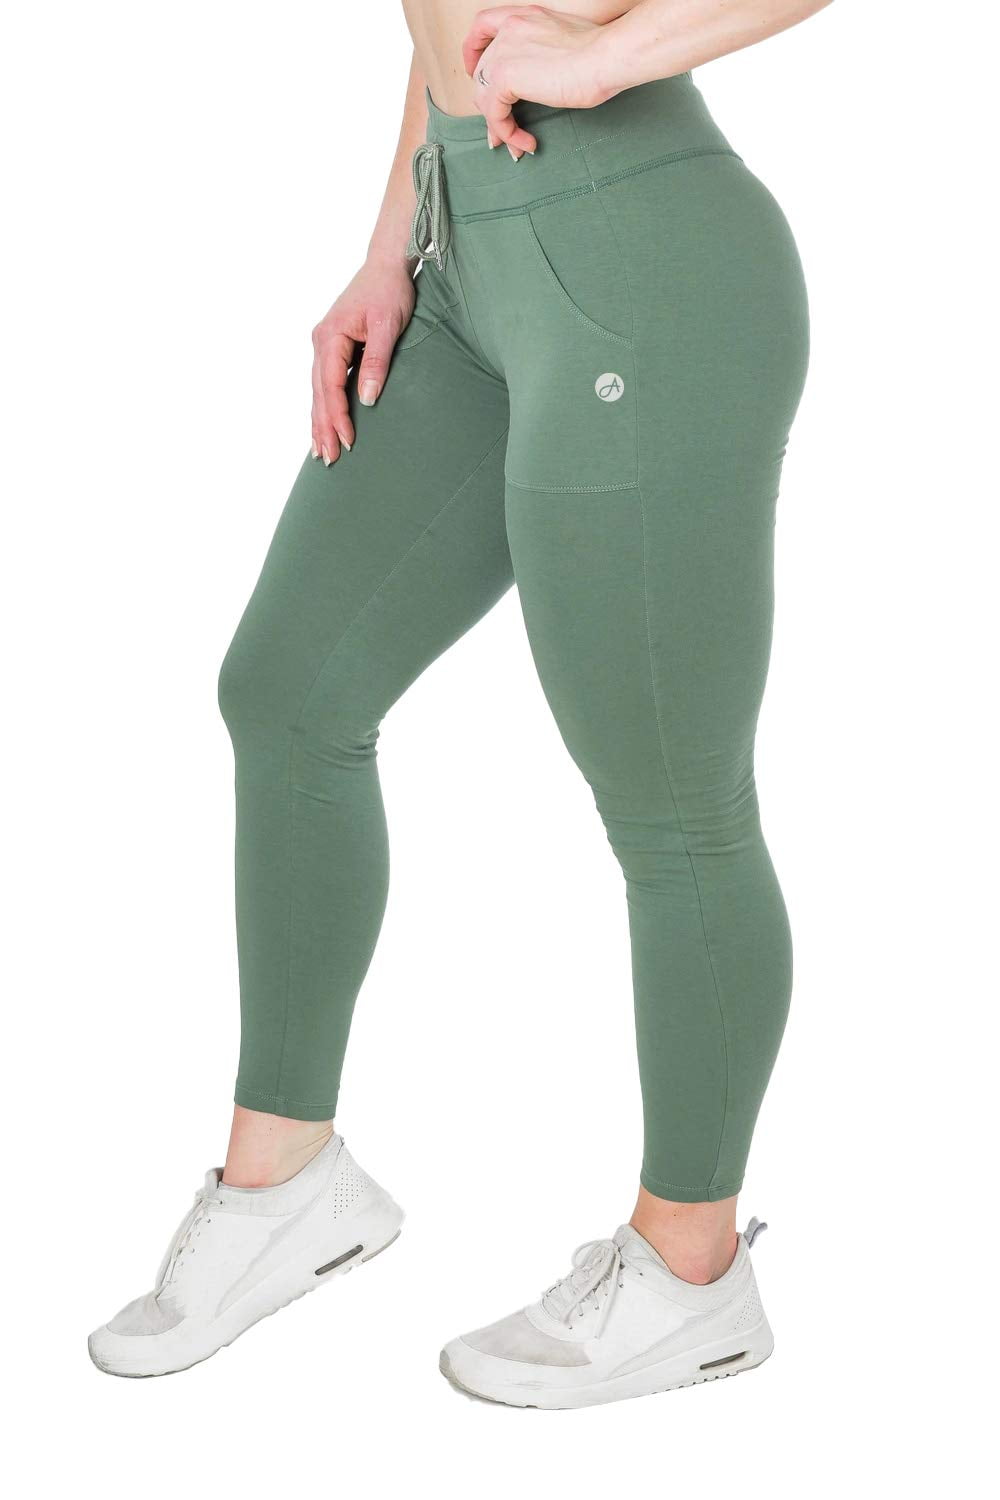 Sherrylily Women High Waisted Gym Pants Sports Leggings Butt Lift Yoga  Tights with Pockets 